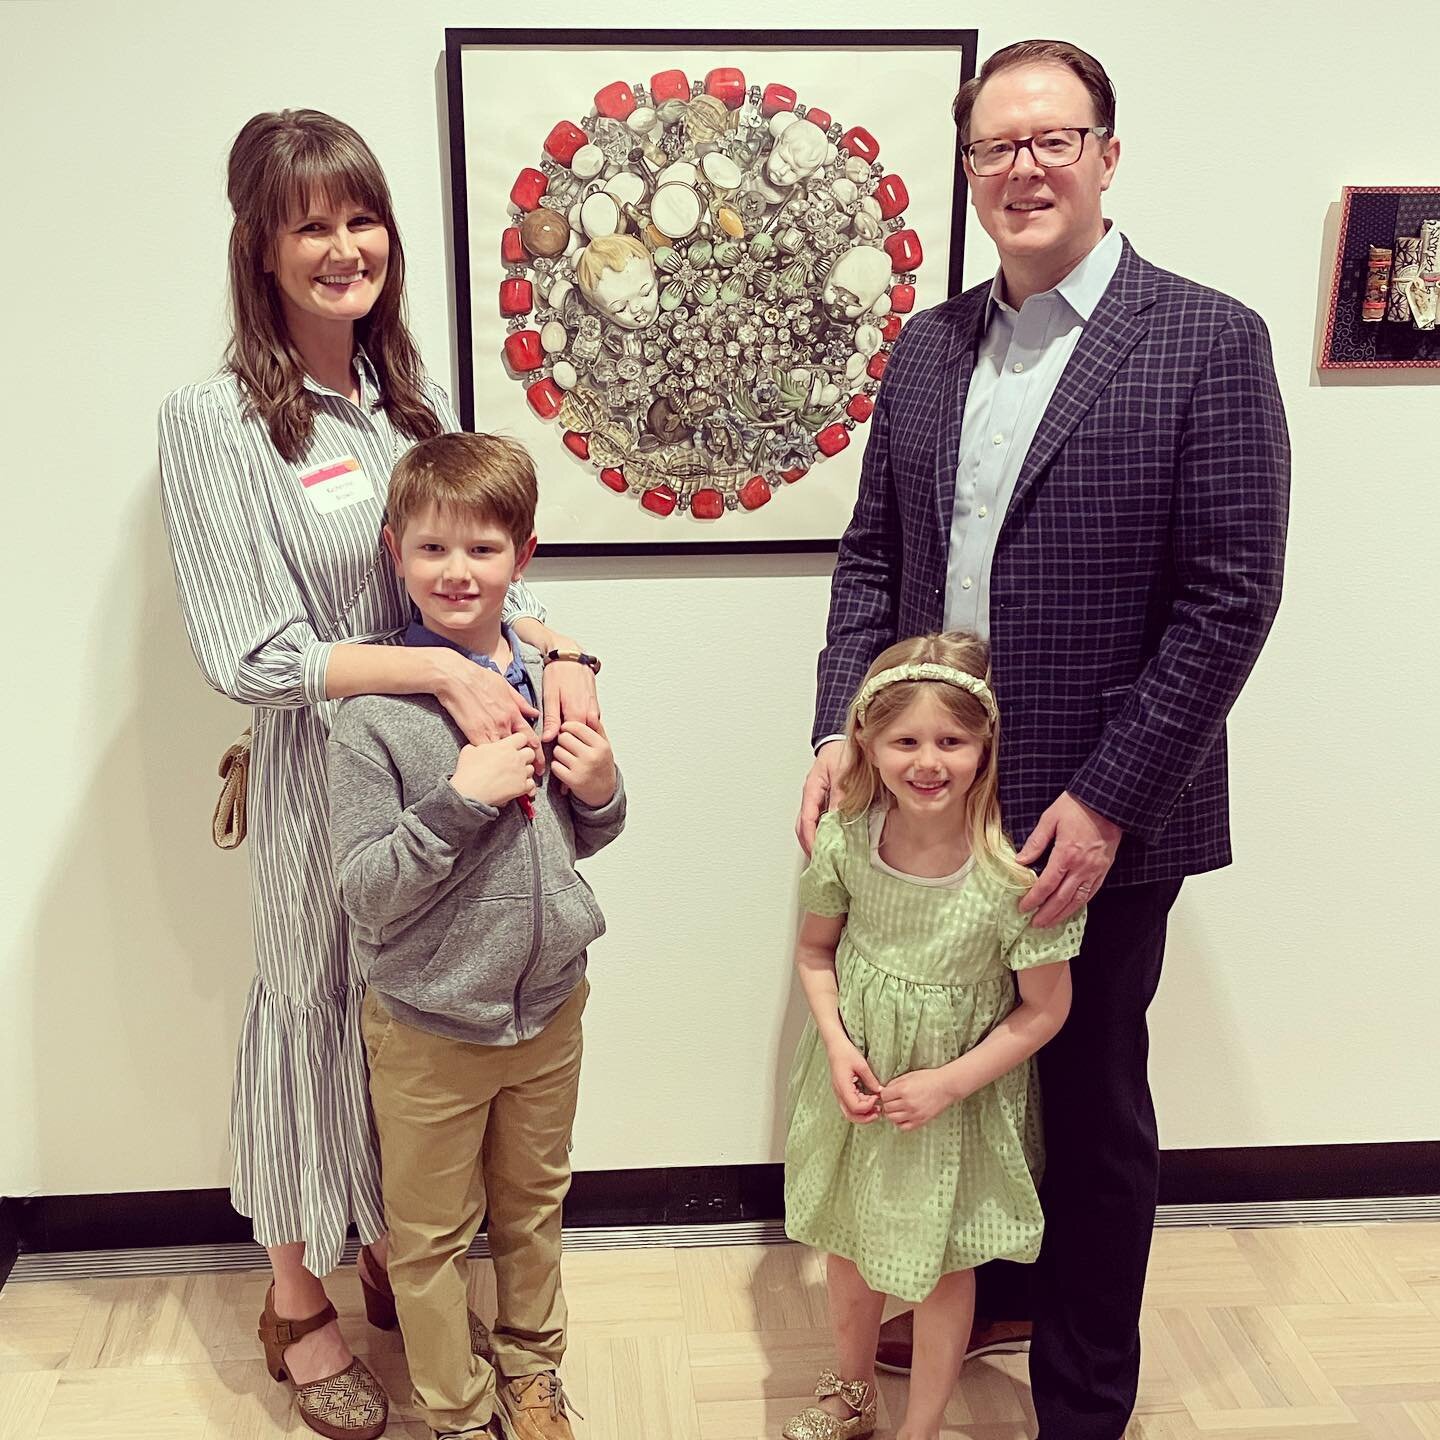 A wonderful evening at the Memorial Art Gallery with my family last night celebrating amazing artistic talent in the Rochester/Finger Lakes community. I can&rsquo;t wait to go back and really take in all the pieces- it&rsquo;s a fantastic show! 
Than